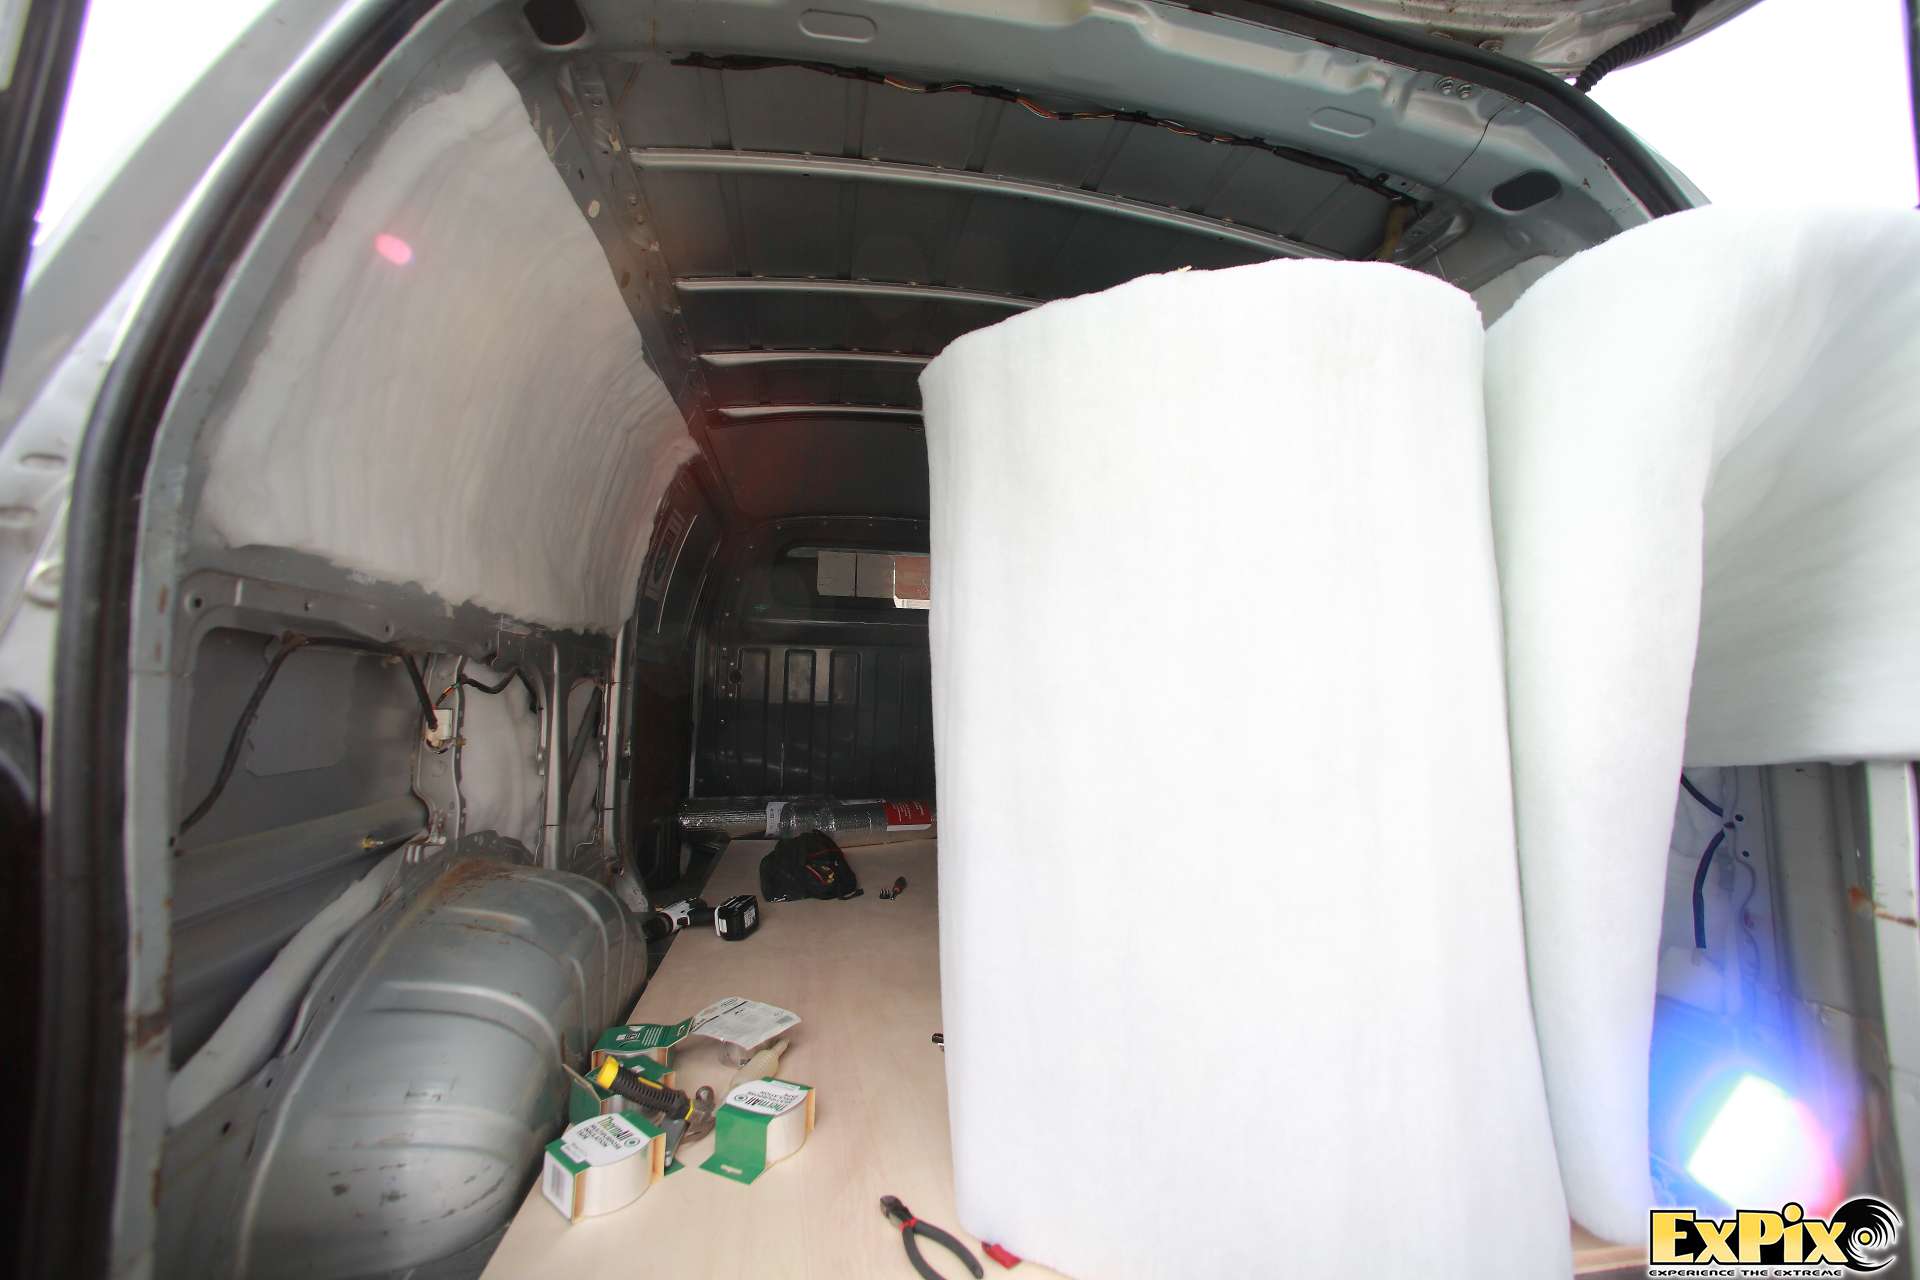 Dacron Thermal insulation for the ExPix Van